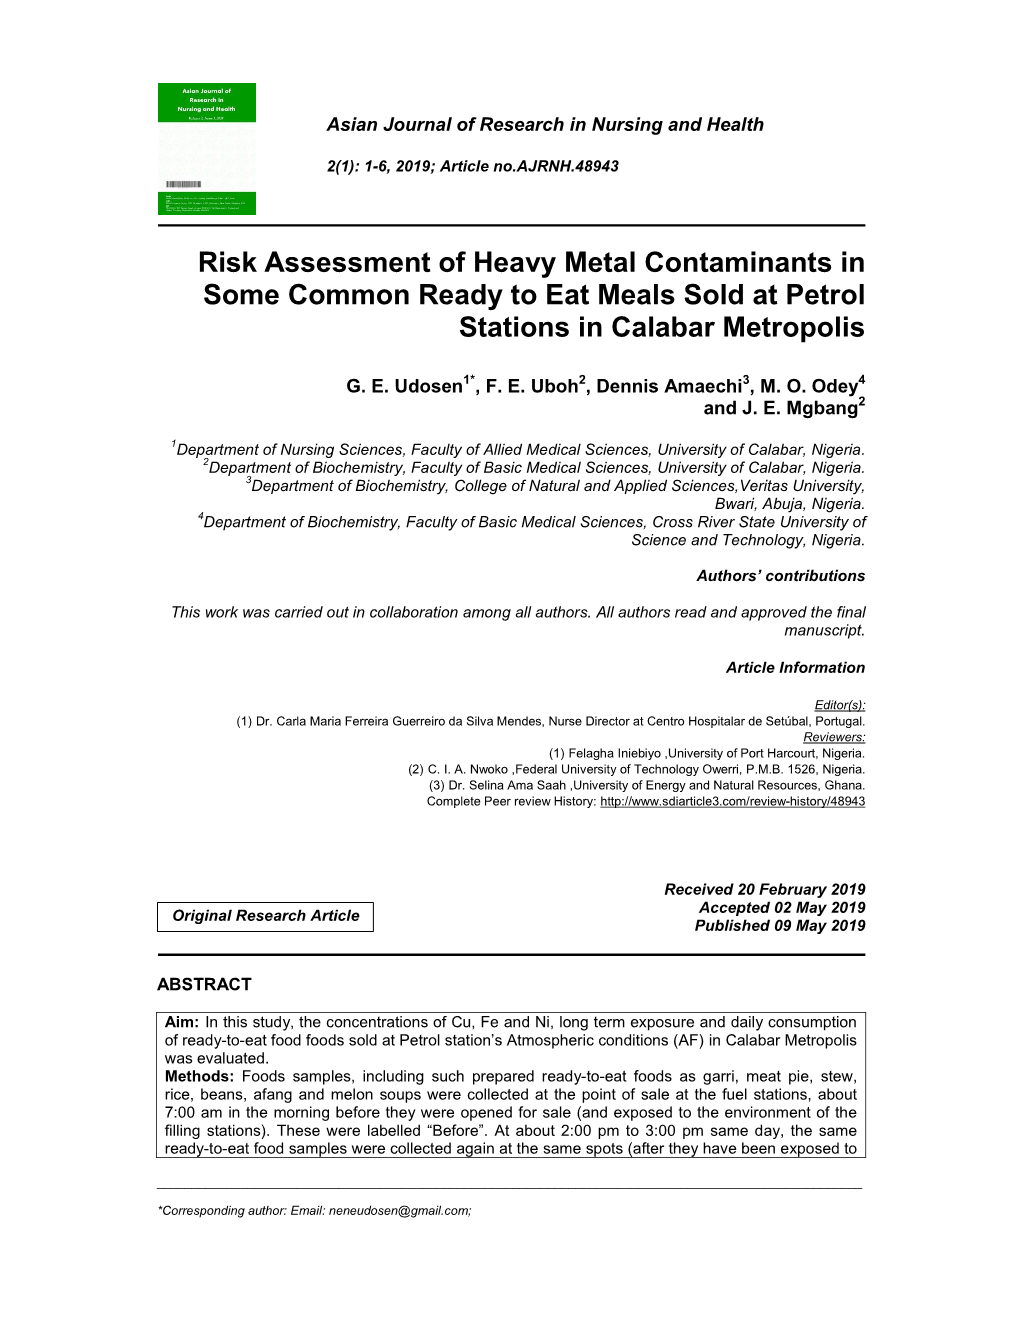 Risk Assessment of Heavy Metal Contaminants in Some Common Ready to Eat Meals Sold at Petrol Stations in Calabar Metropolis